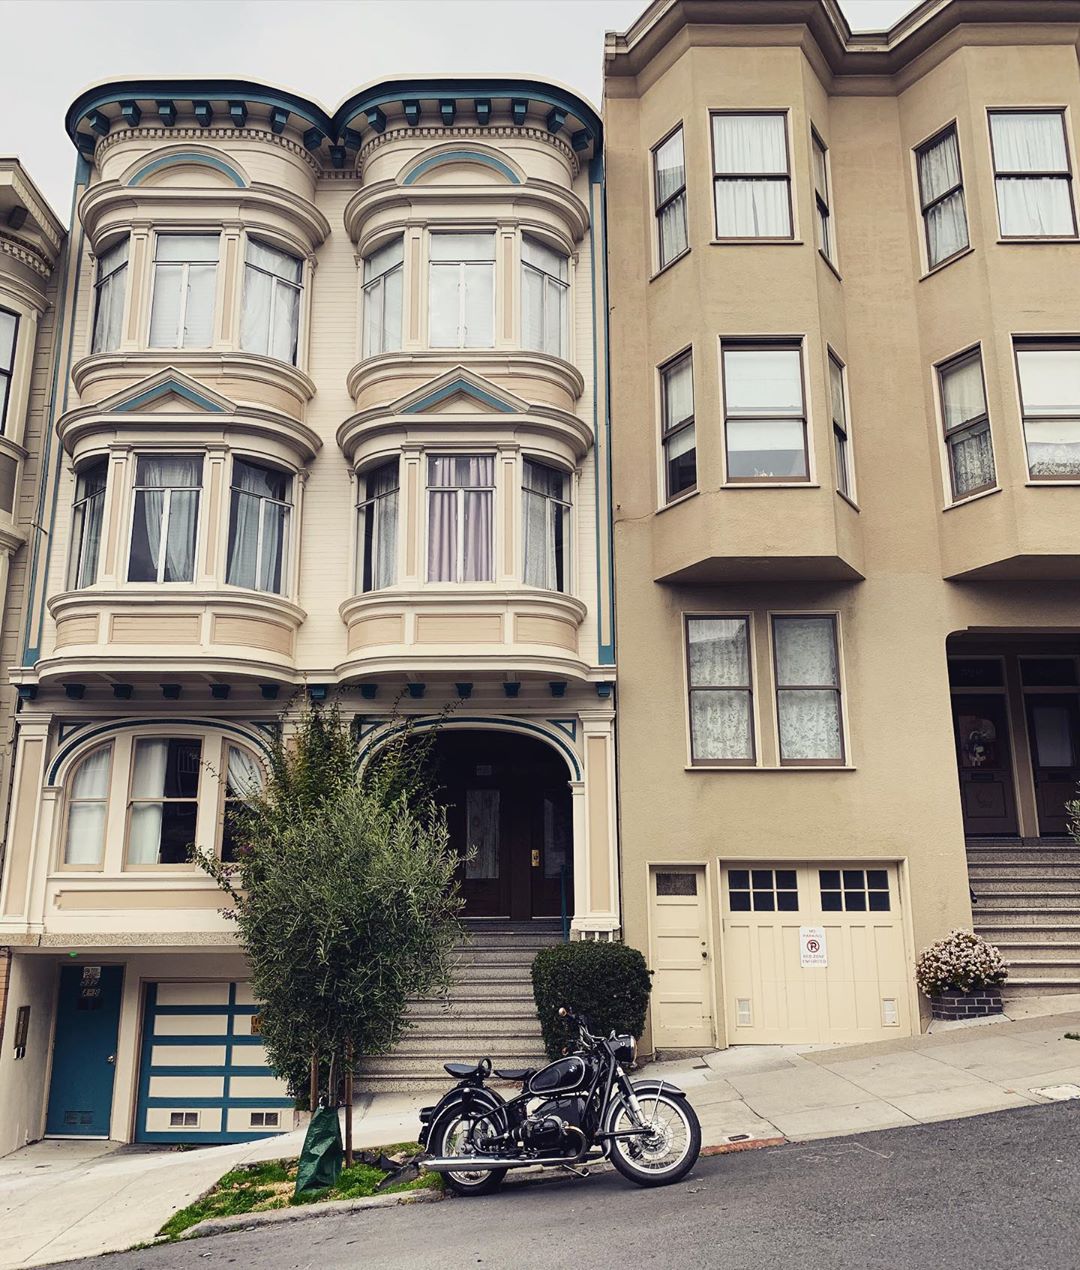 Italianate Style Home in North Beach, San Francisco. Photo by Instagram User @linseythornton